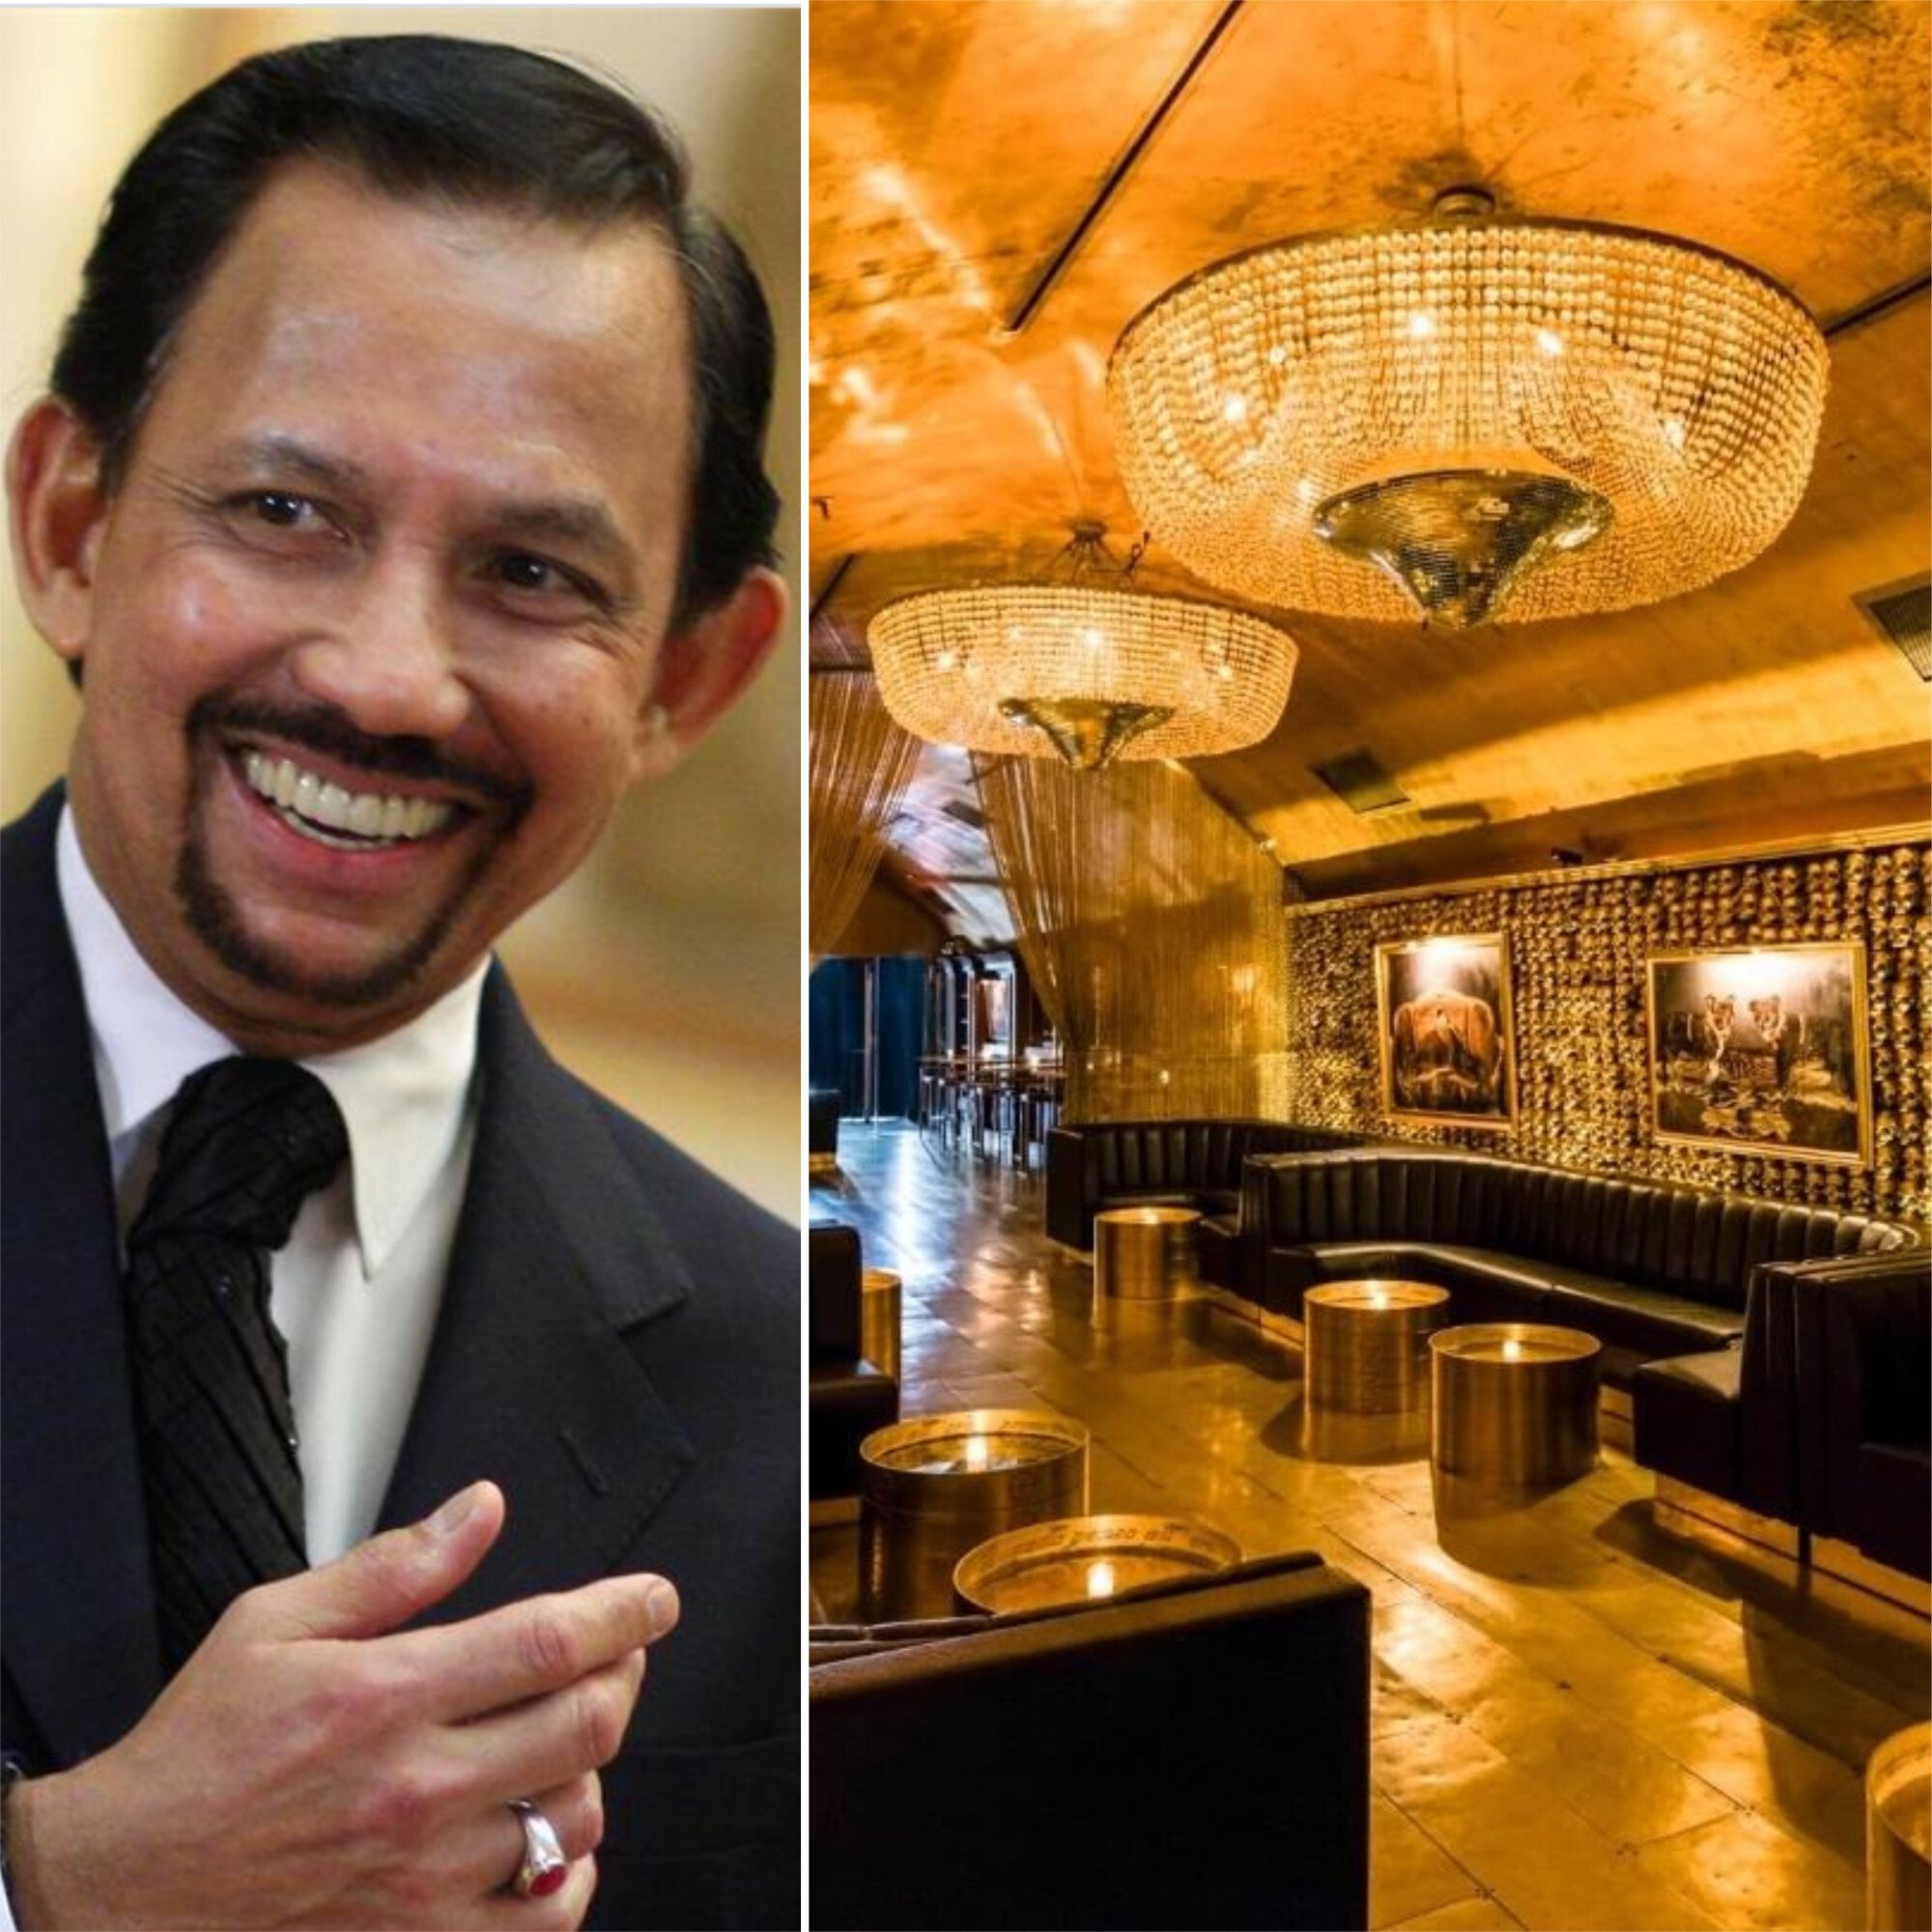 The Sultan of Brunei, Hassanal Bolkiah, really knows how to splash his cash. Photos: @Hassanal Bolkiah, Sultan of Brunei/Facebook, @sultanbrunei46/Instagram